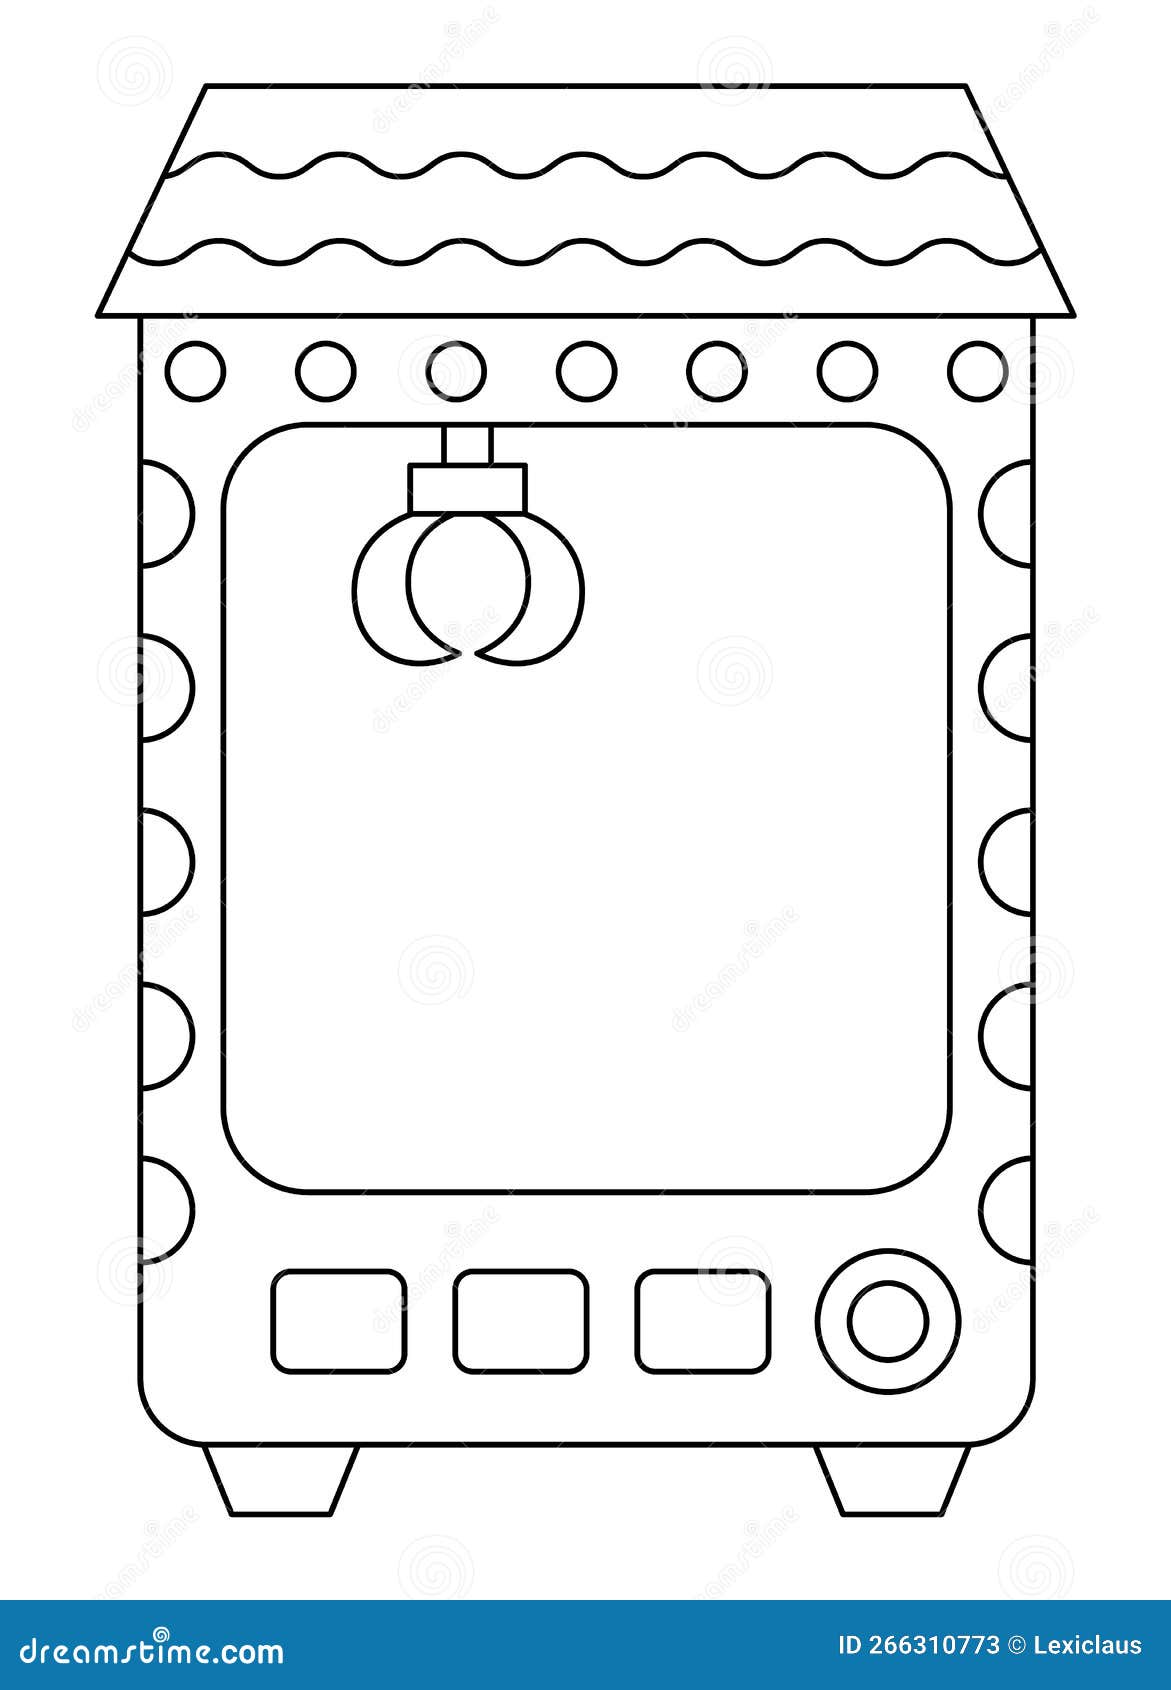 Vector black and white kawaii toy vending machine icon for kids cute line gadget illustration or coloring page stock vector